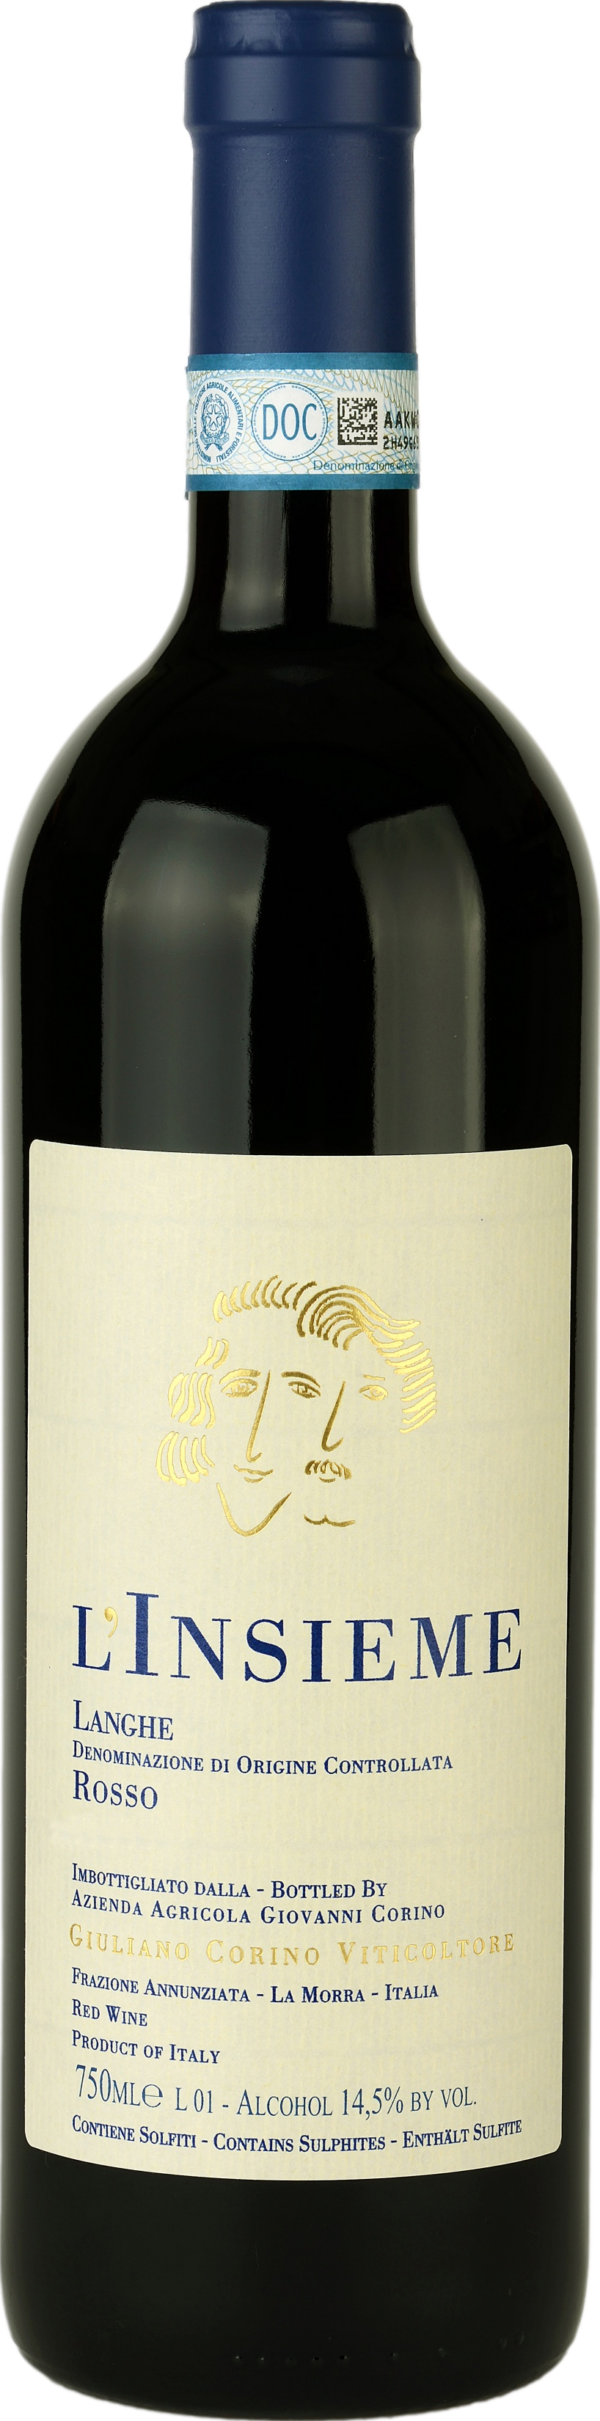 Product image of Giovanni Corino L'Insieme Langhe Rosso 2020 from 8wines